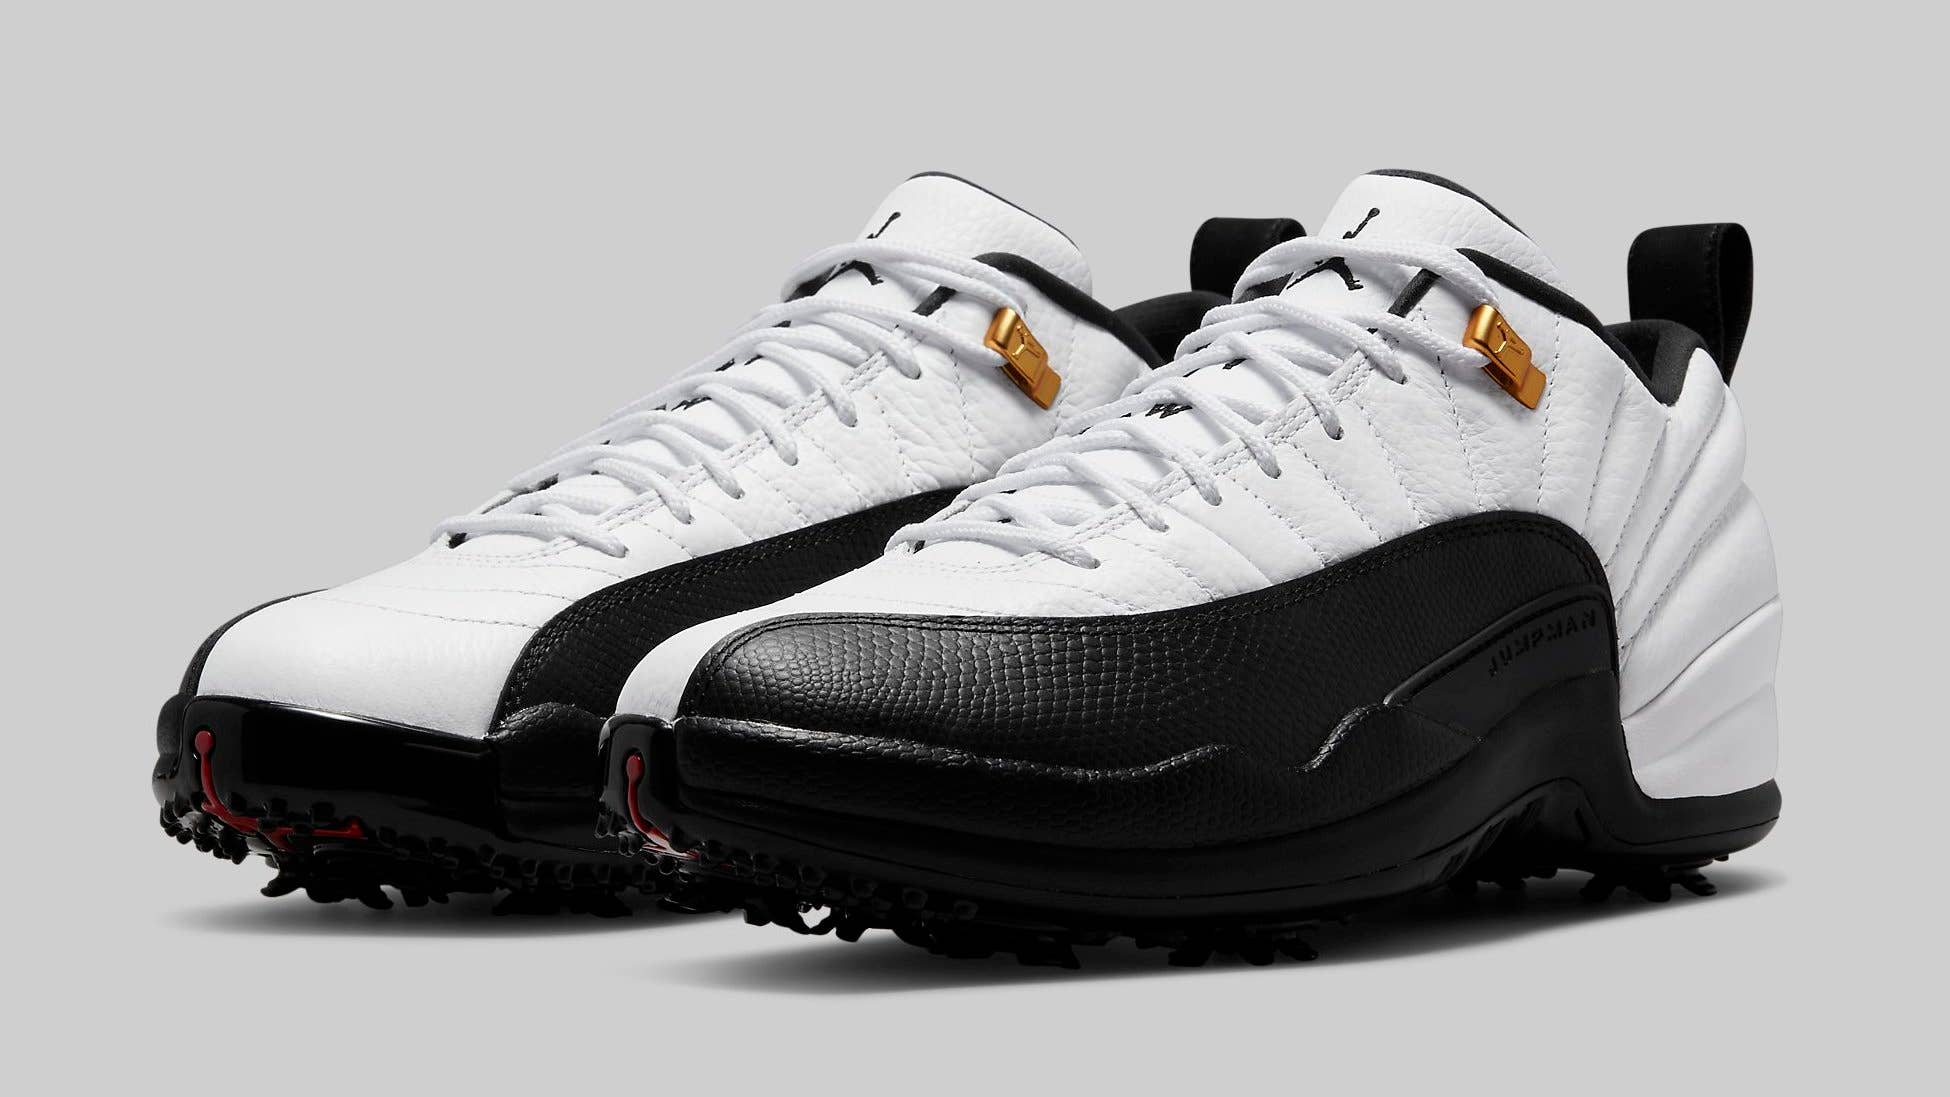 What's In The Box? The Air Jordan XII Low 'Taxi' Golf Shoe 